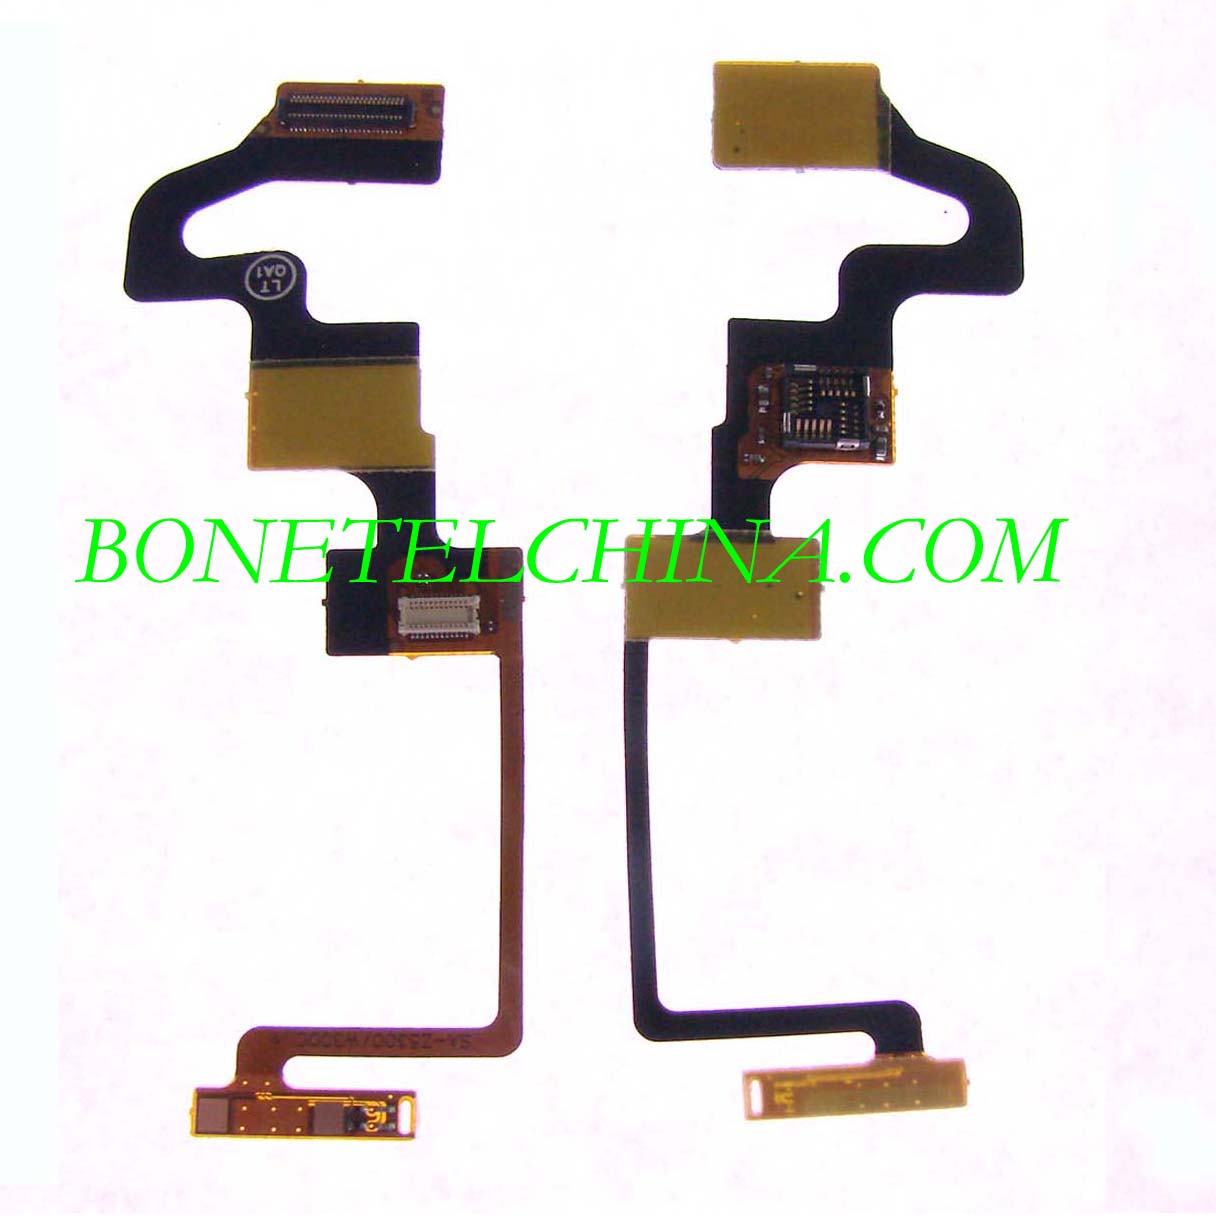 Z530 / W300 Mobile phone Flex Cables for Sony Ericsson